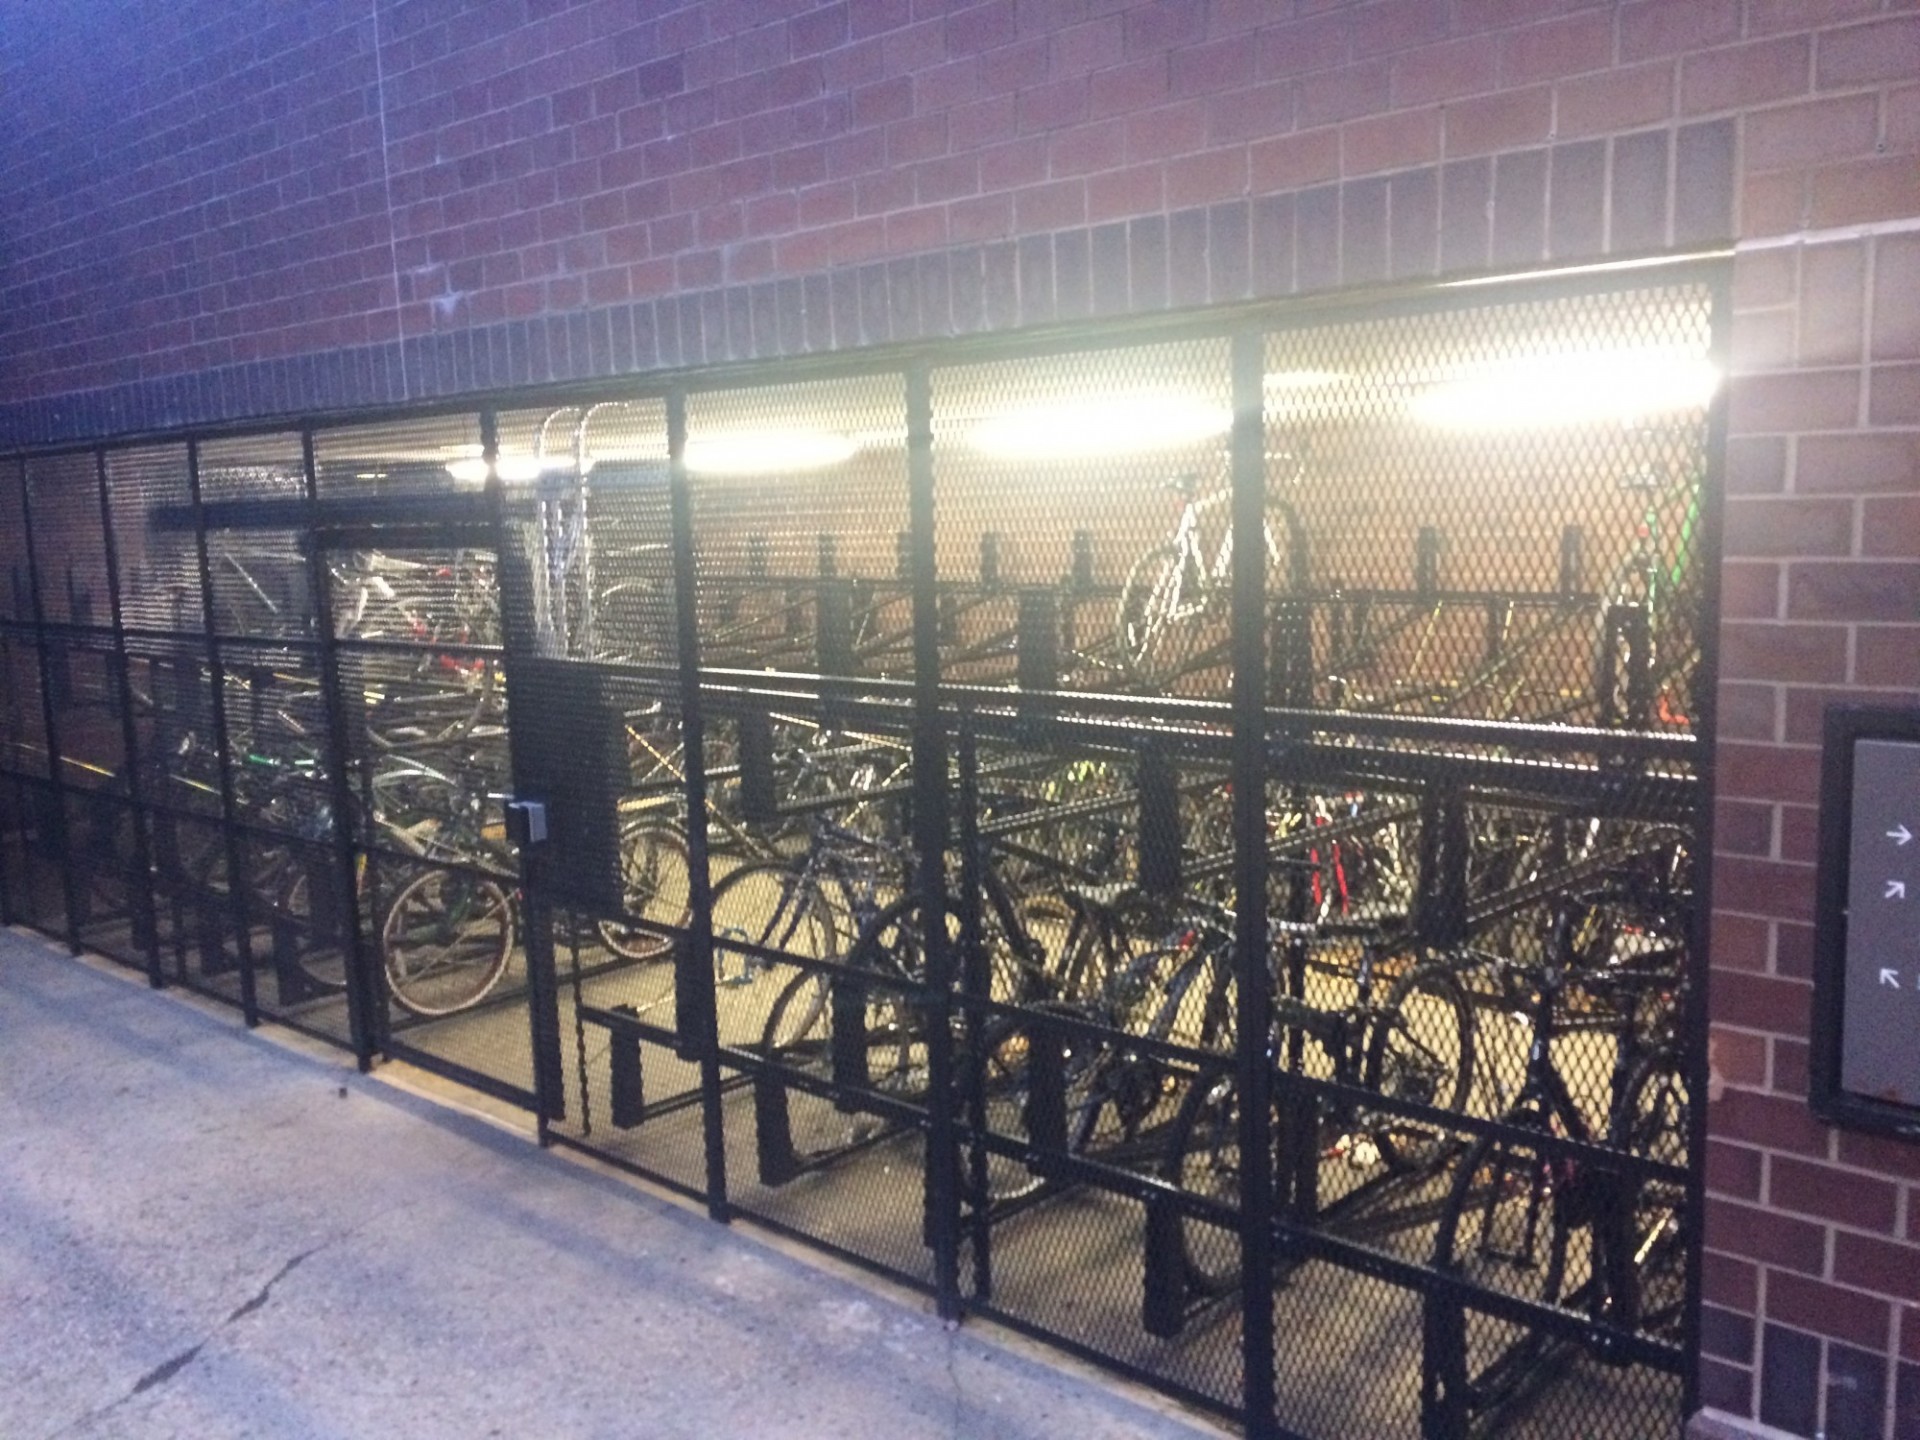 Photo looking into a bike parking enclosure from the outside at Columbia's Morningside campus.